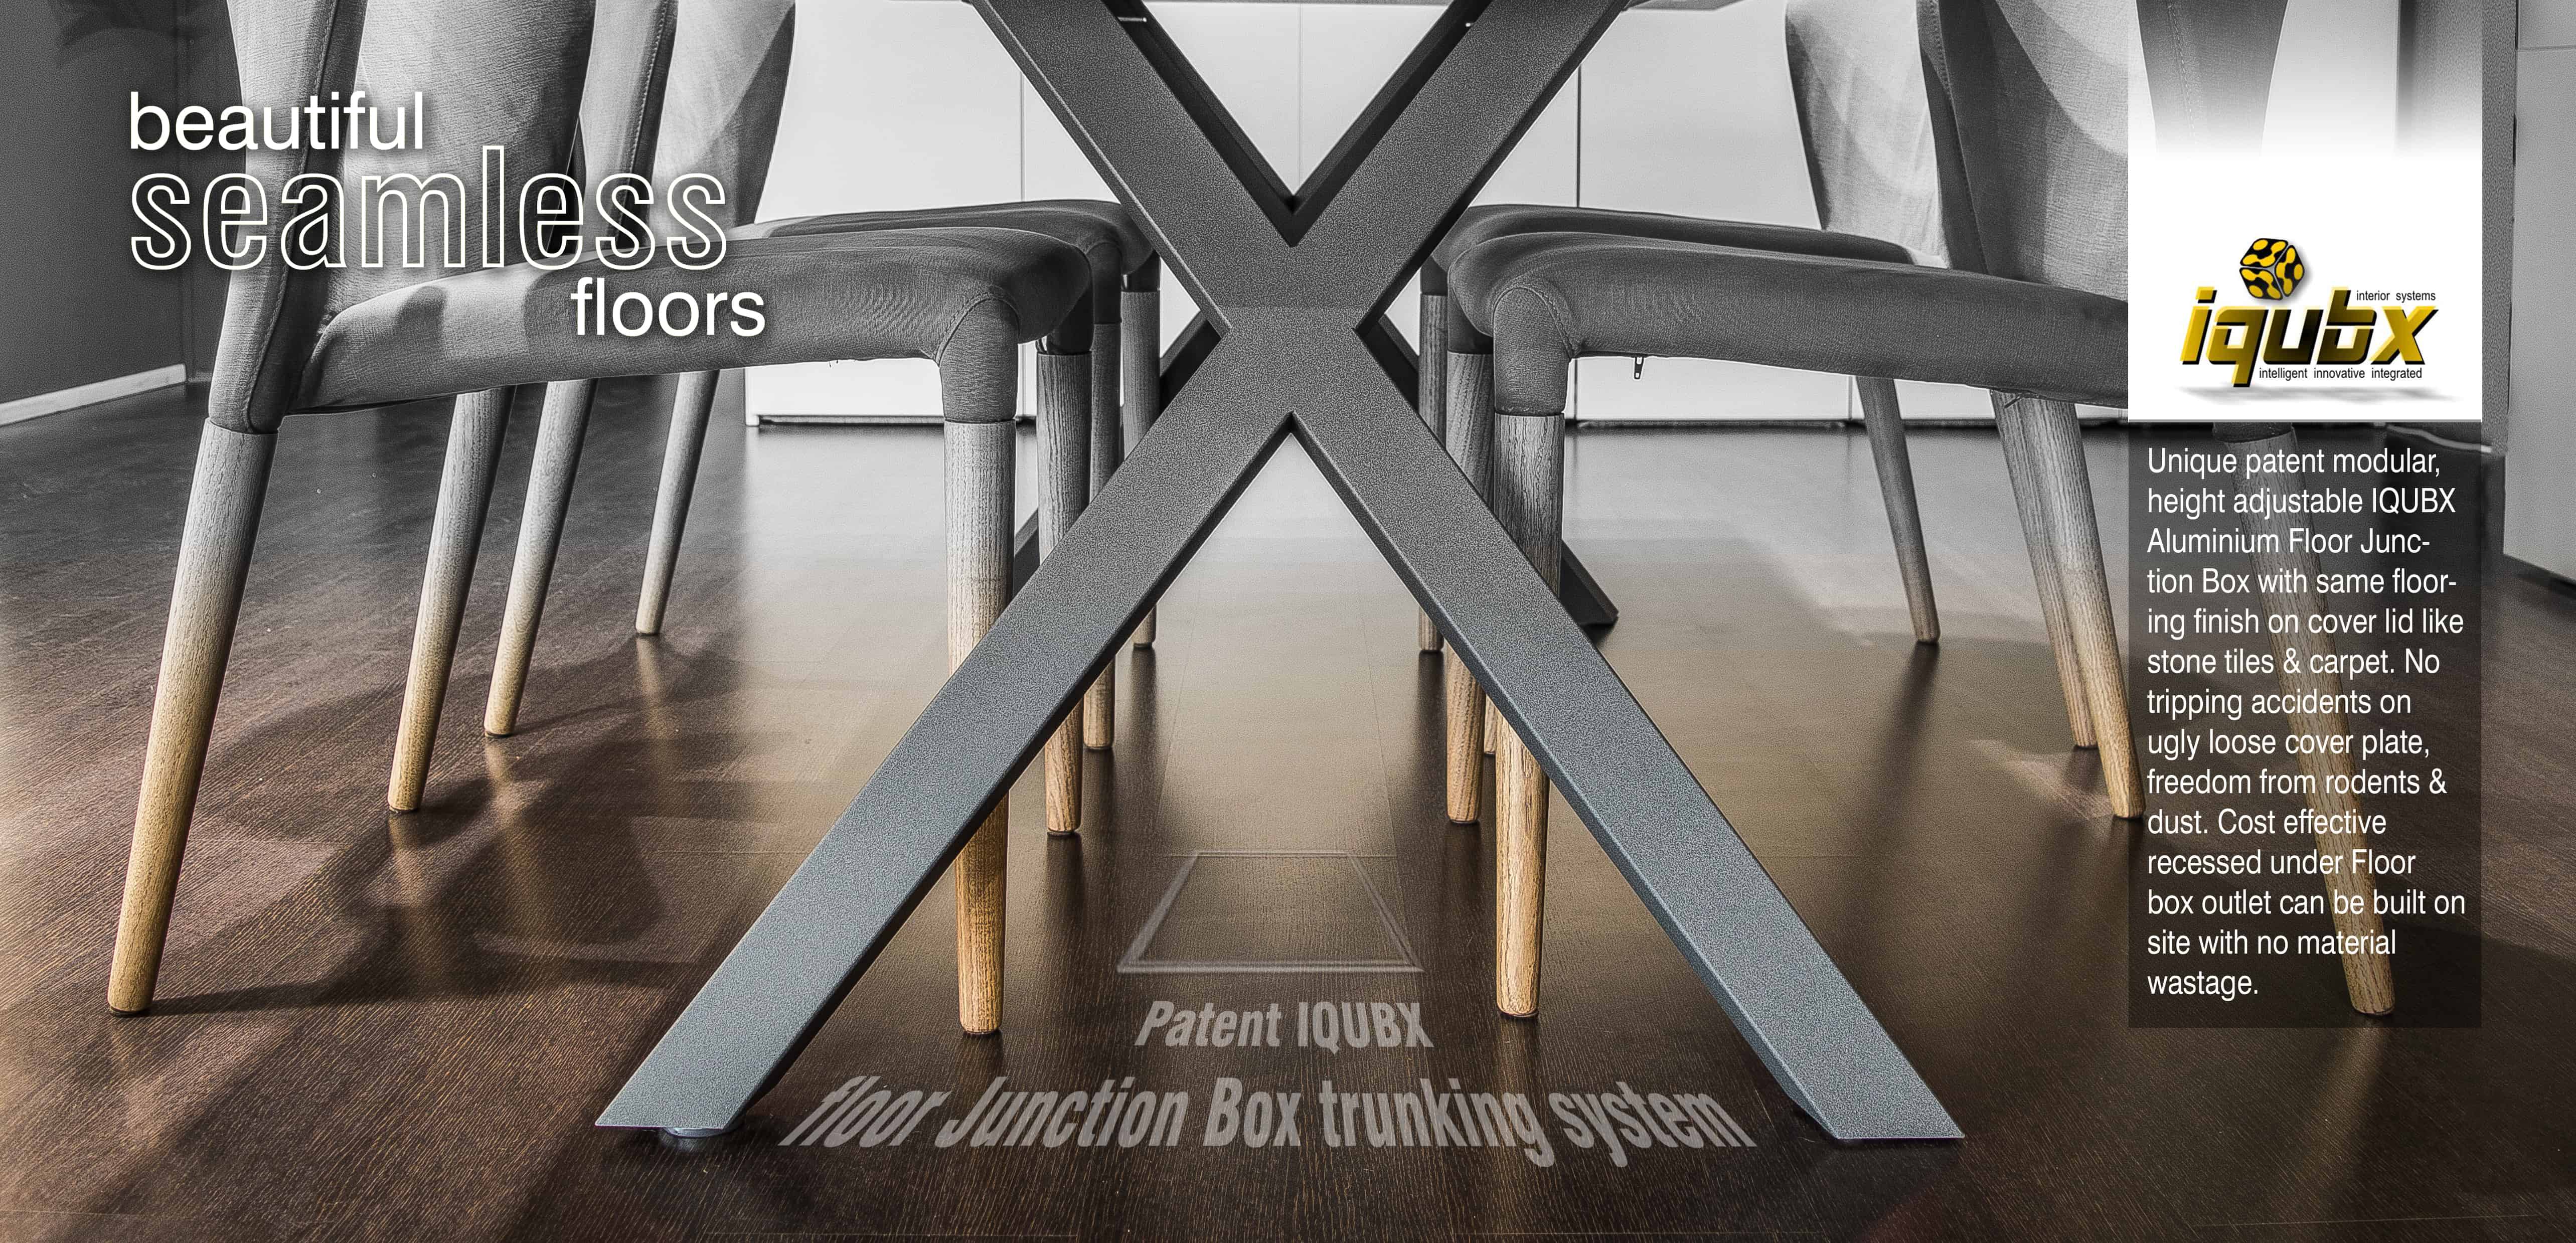 IQUBX Floor junction box has seamless floor finish, lid cover doesnt come loose, prevents rodents and dust, accidents